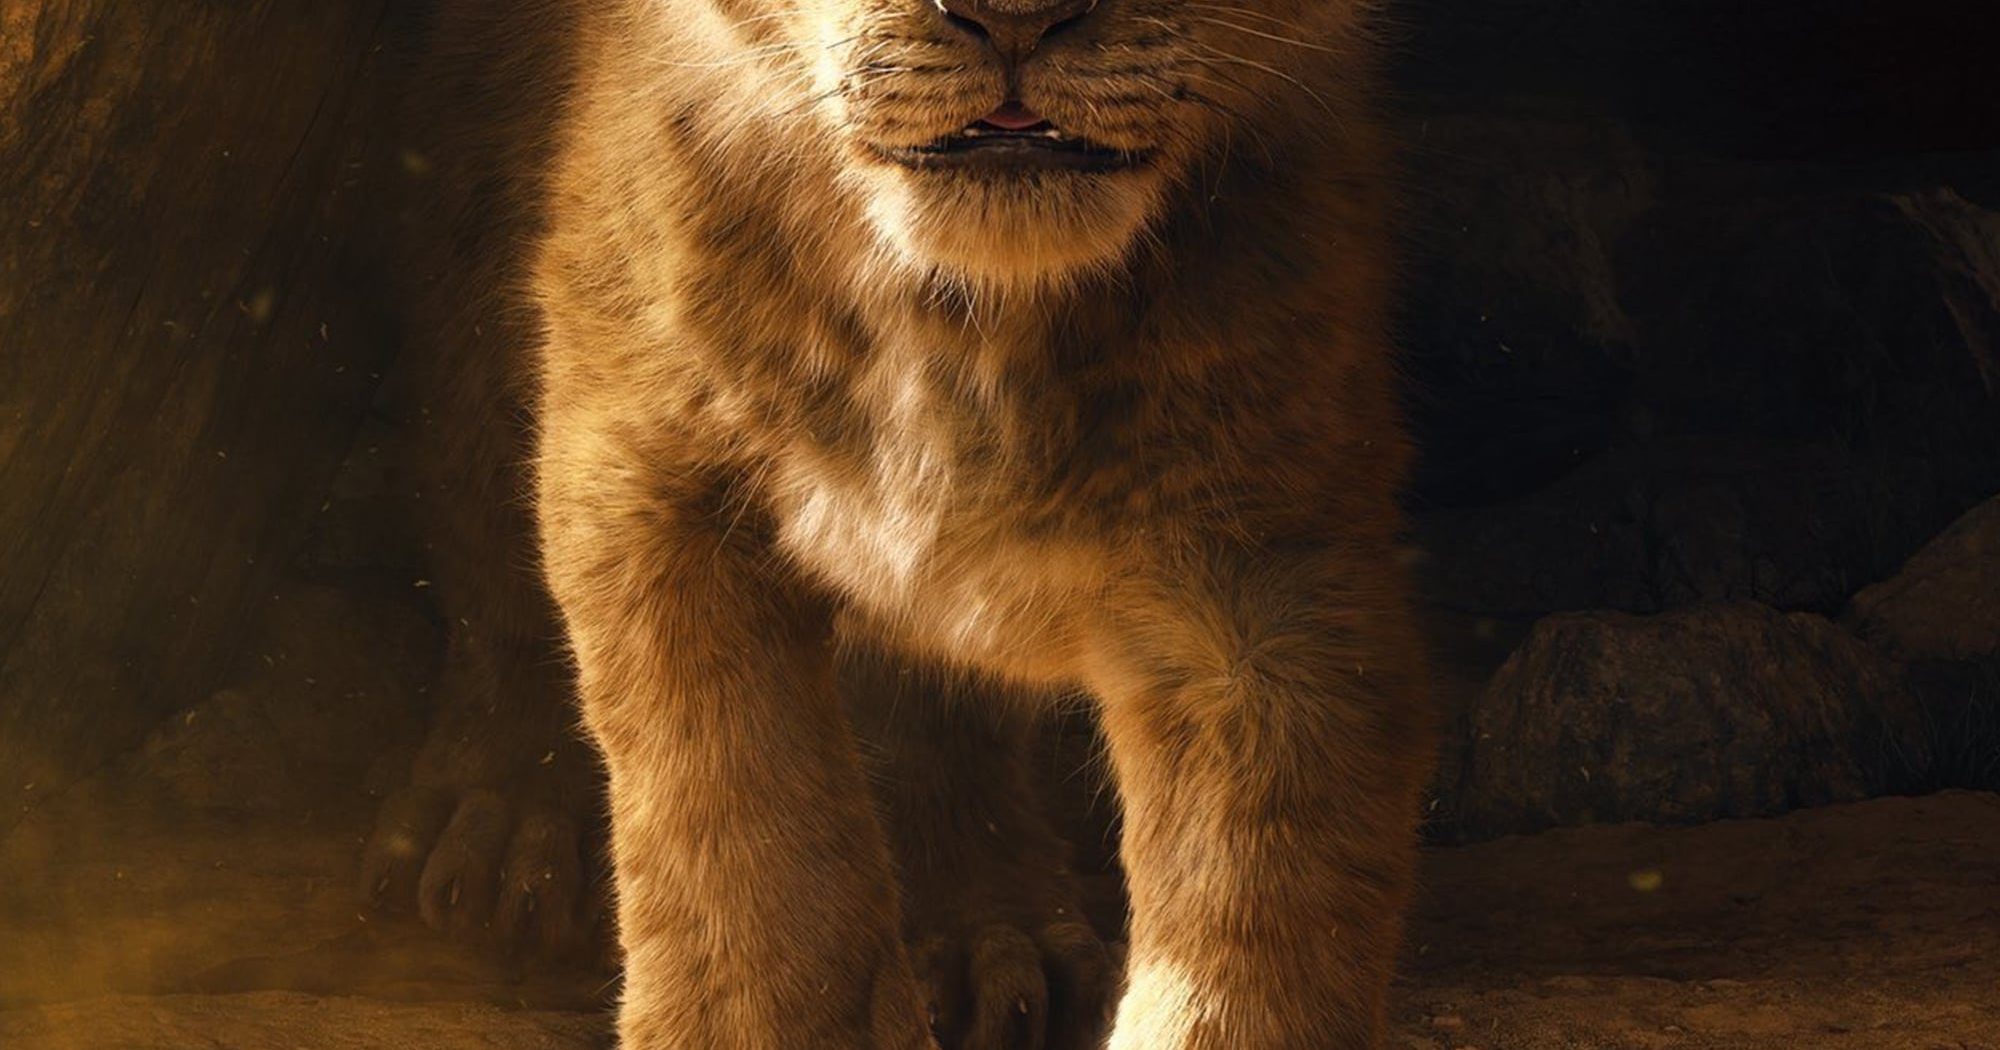 Poster for the movie "The Lion King"